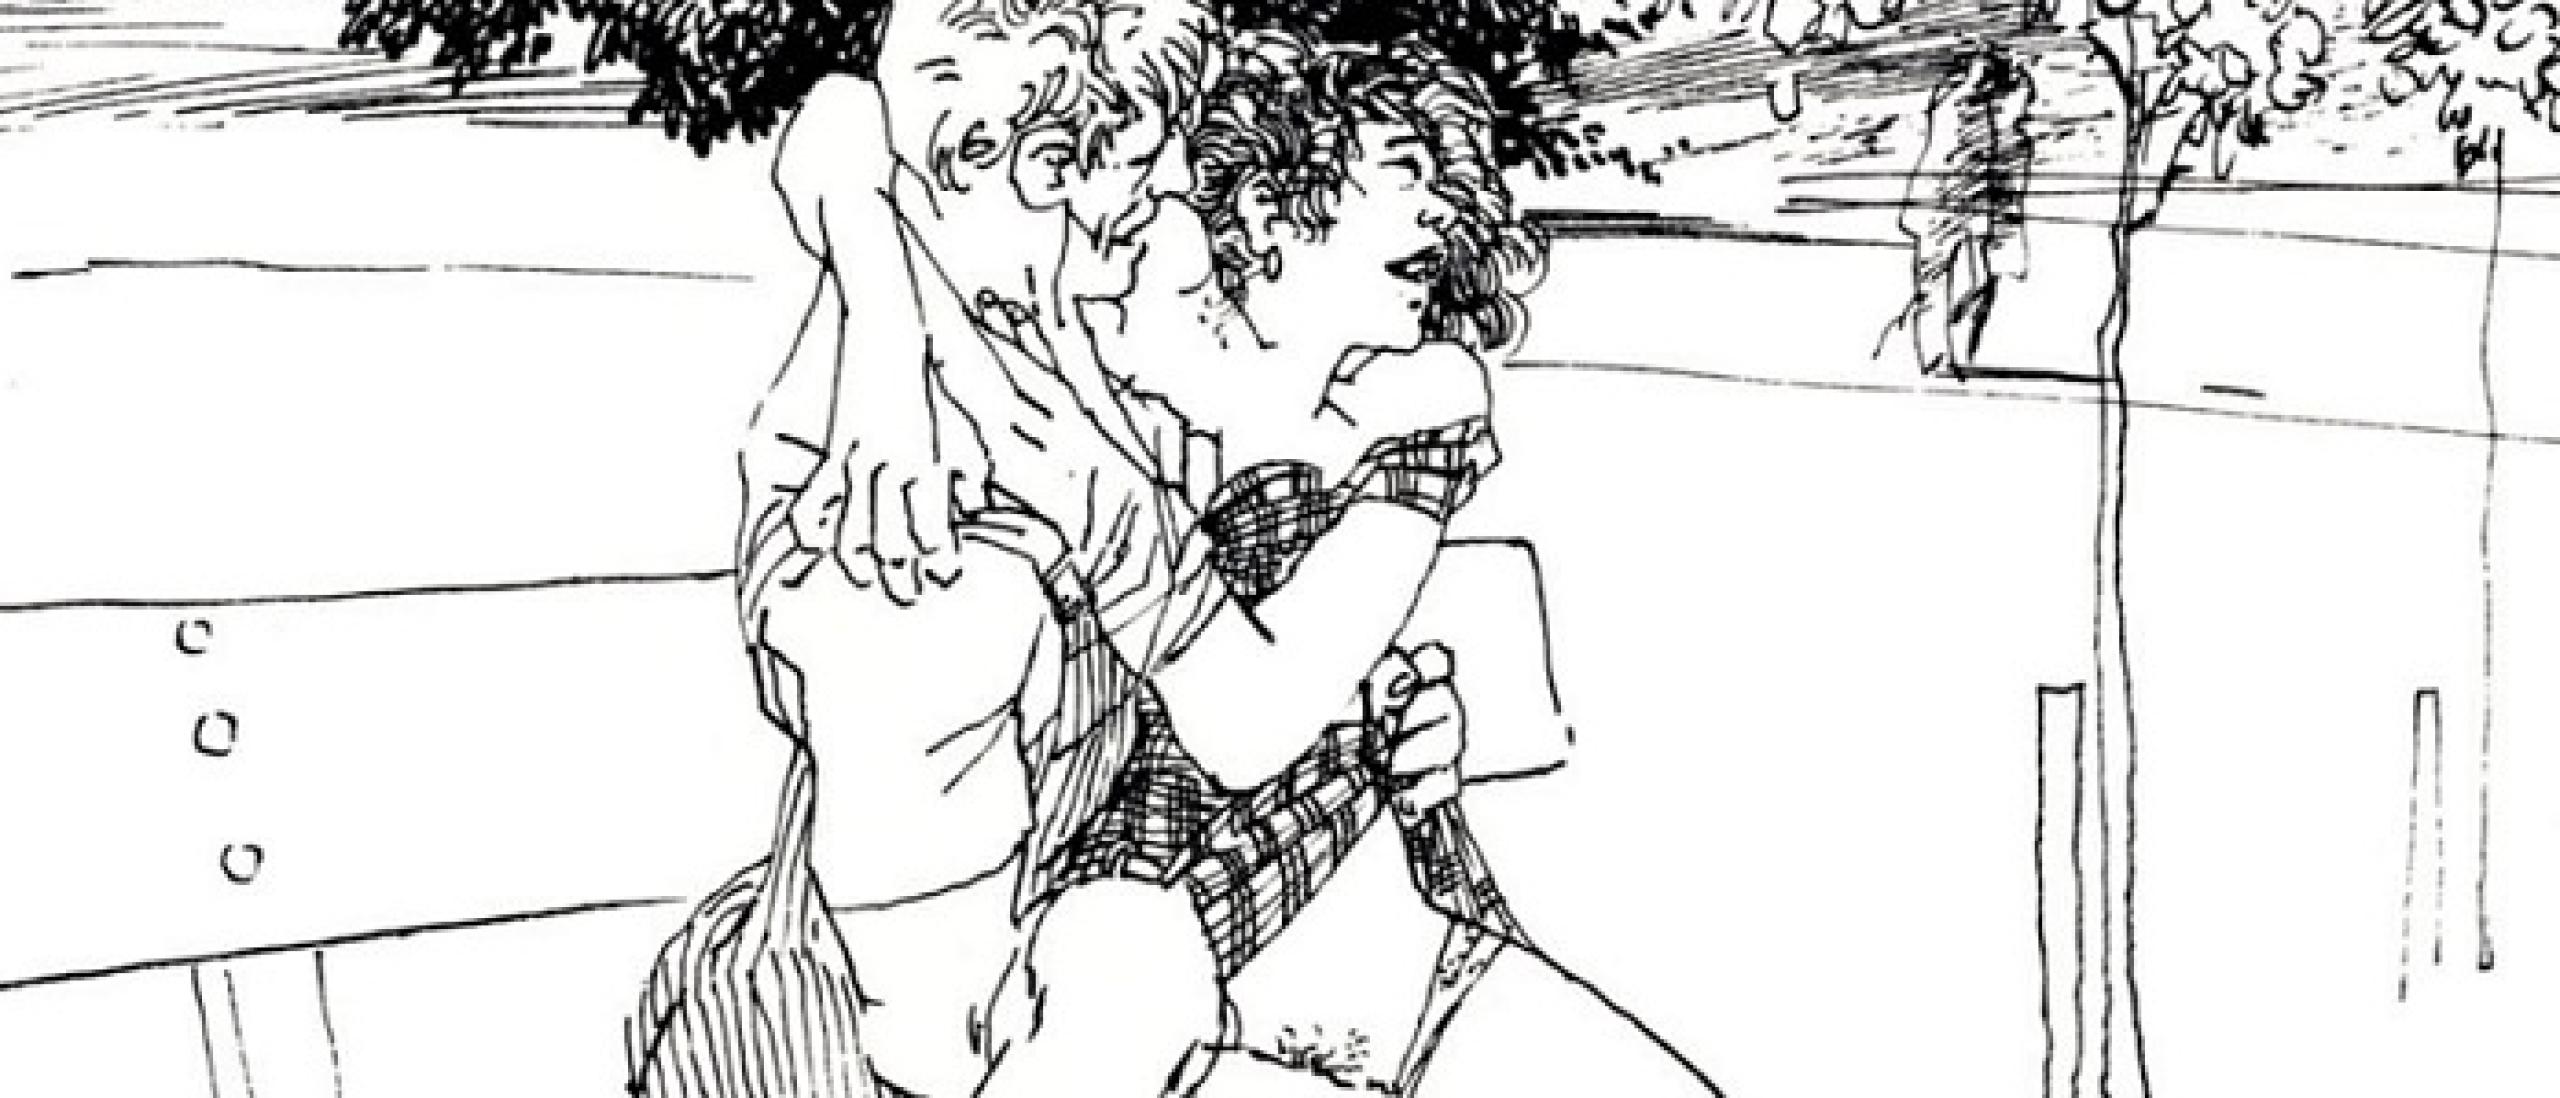 aanstoot erotic drawing intimate couple on a bench in the park